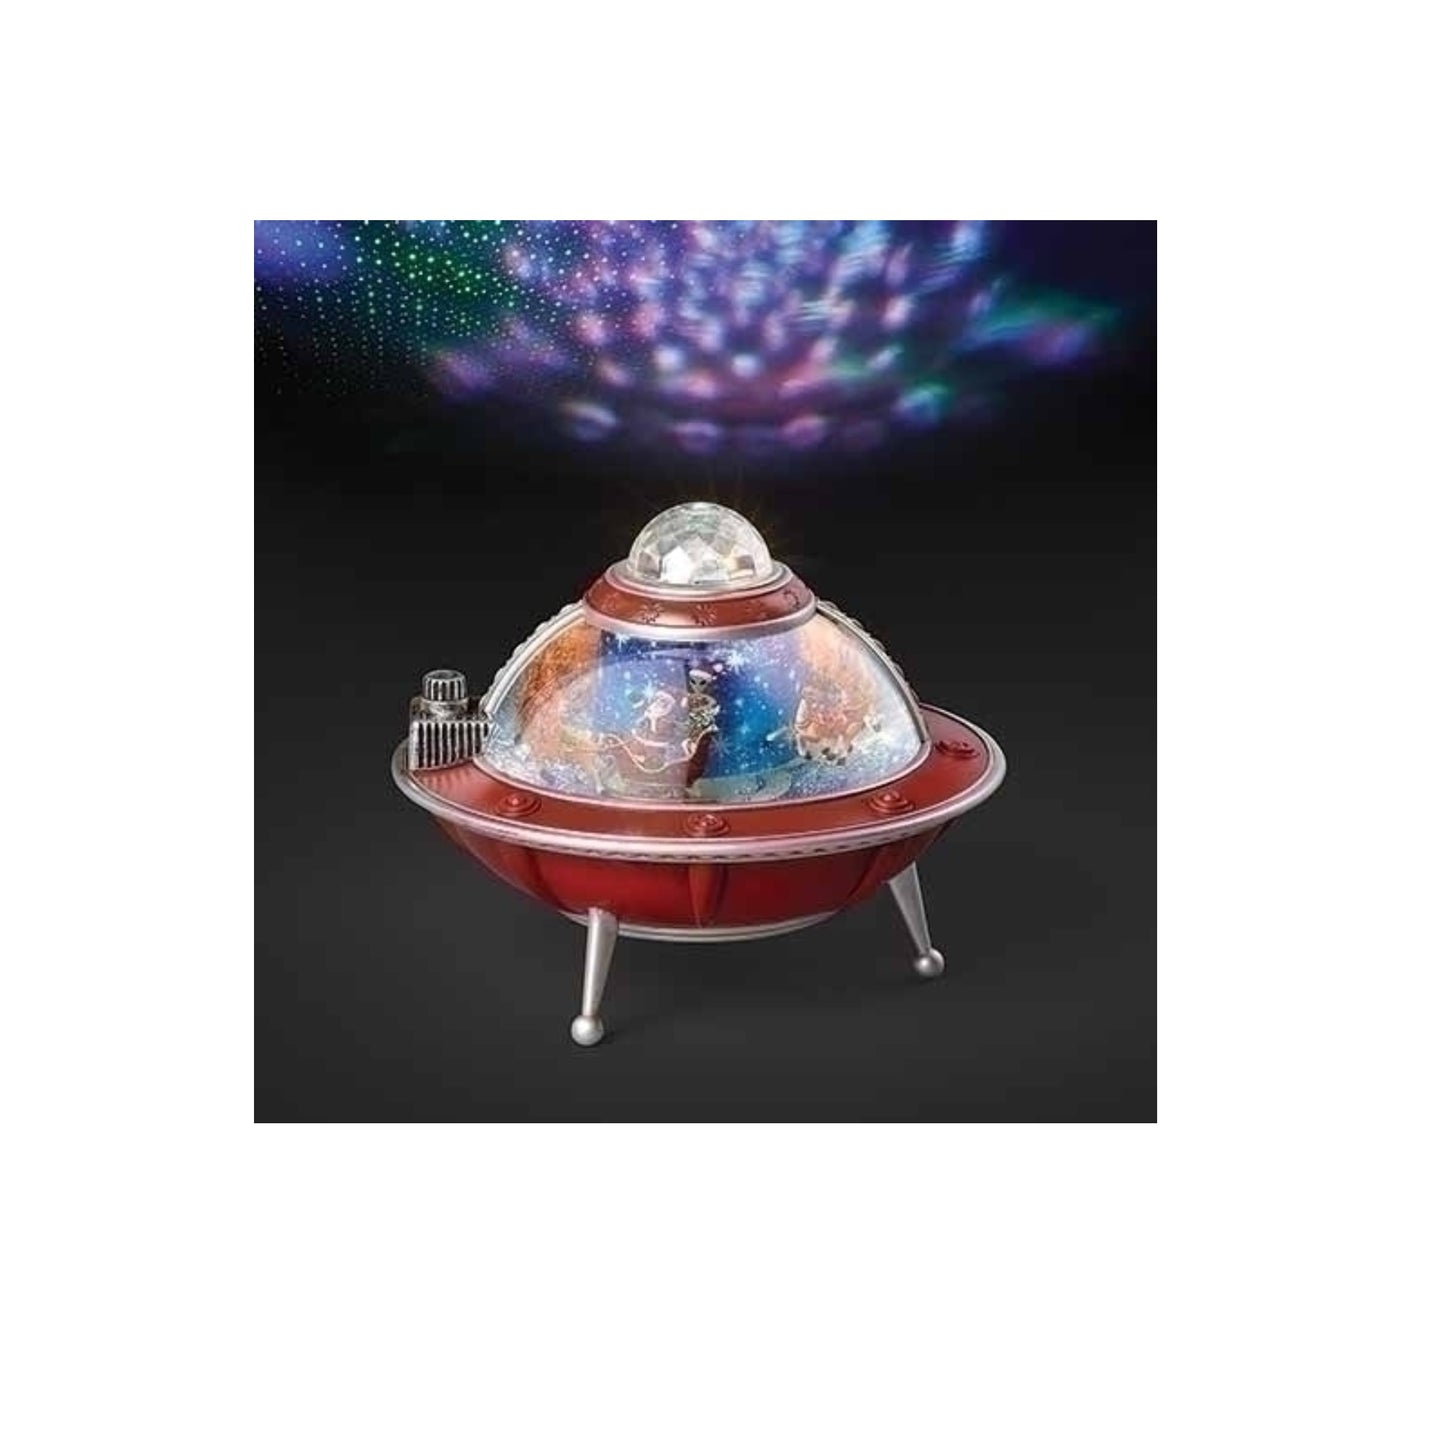 Roman 10.5" Red and Blue LED Musical Swirl UFO Ship Christmas Tabletop Decor